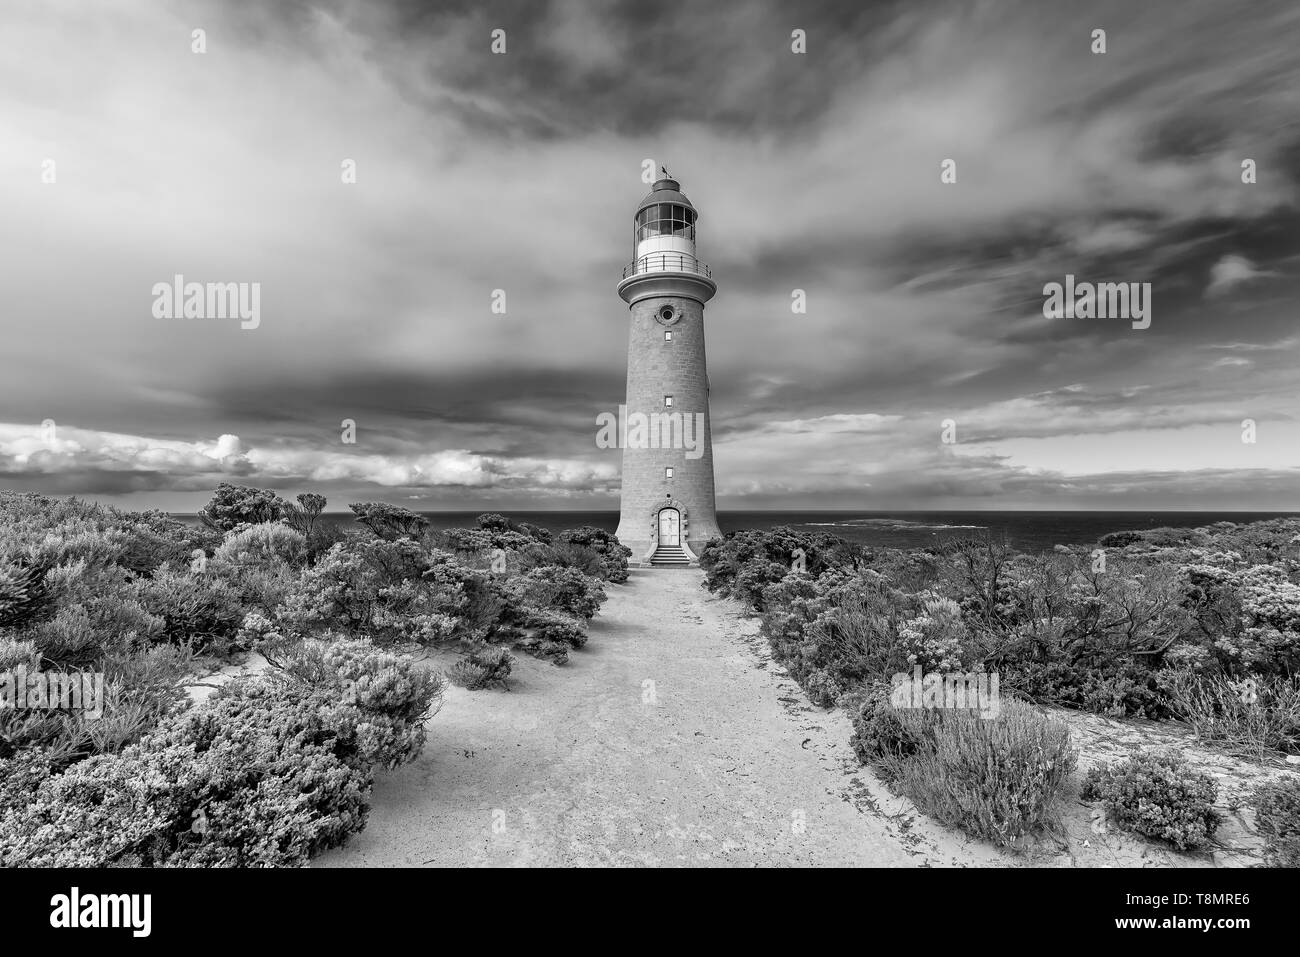 The beautiful Cape du Couedic Lighthouse in black and white on a day with dramatic sky, Kangaroo Island, Southern Australia Stock Photo